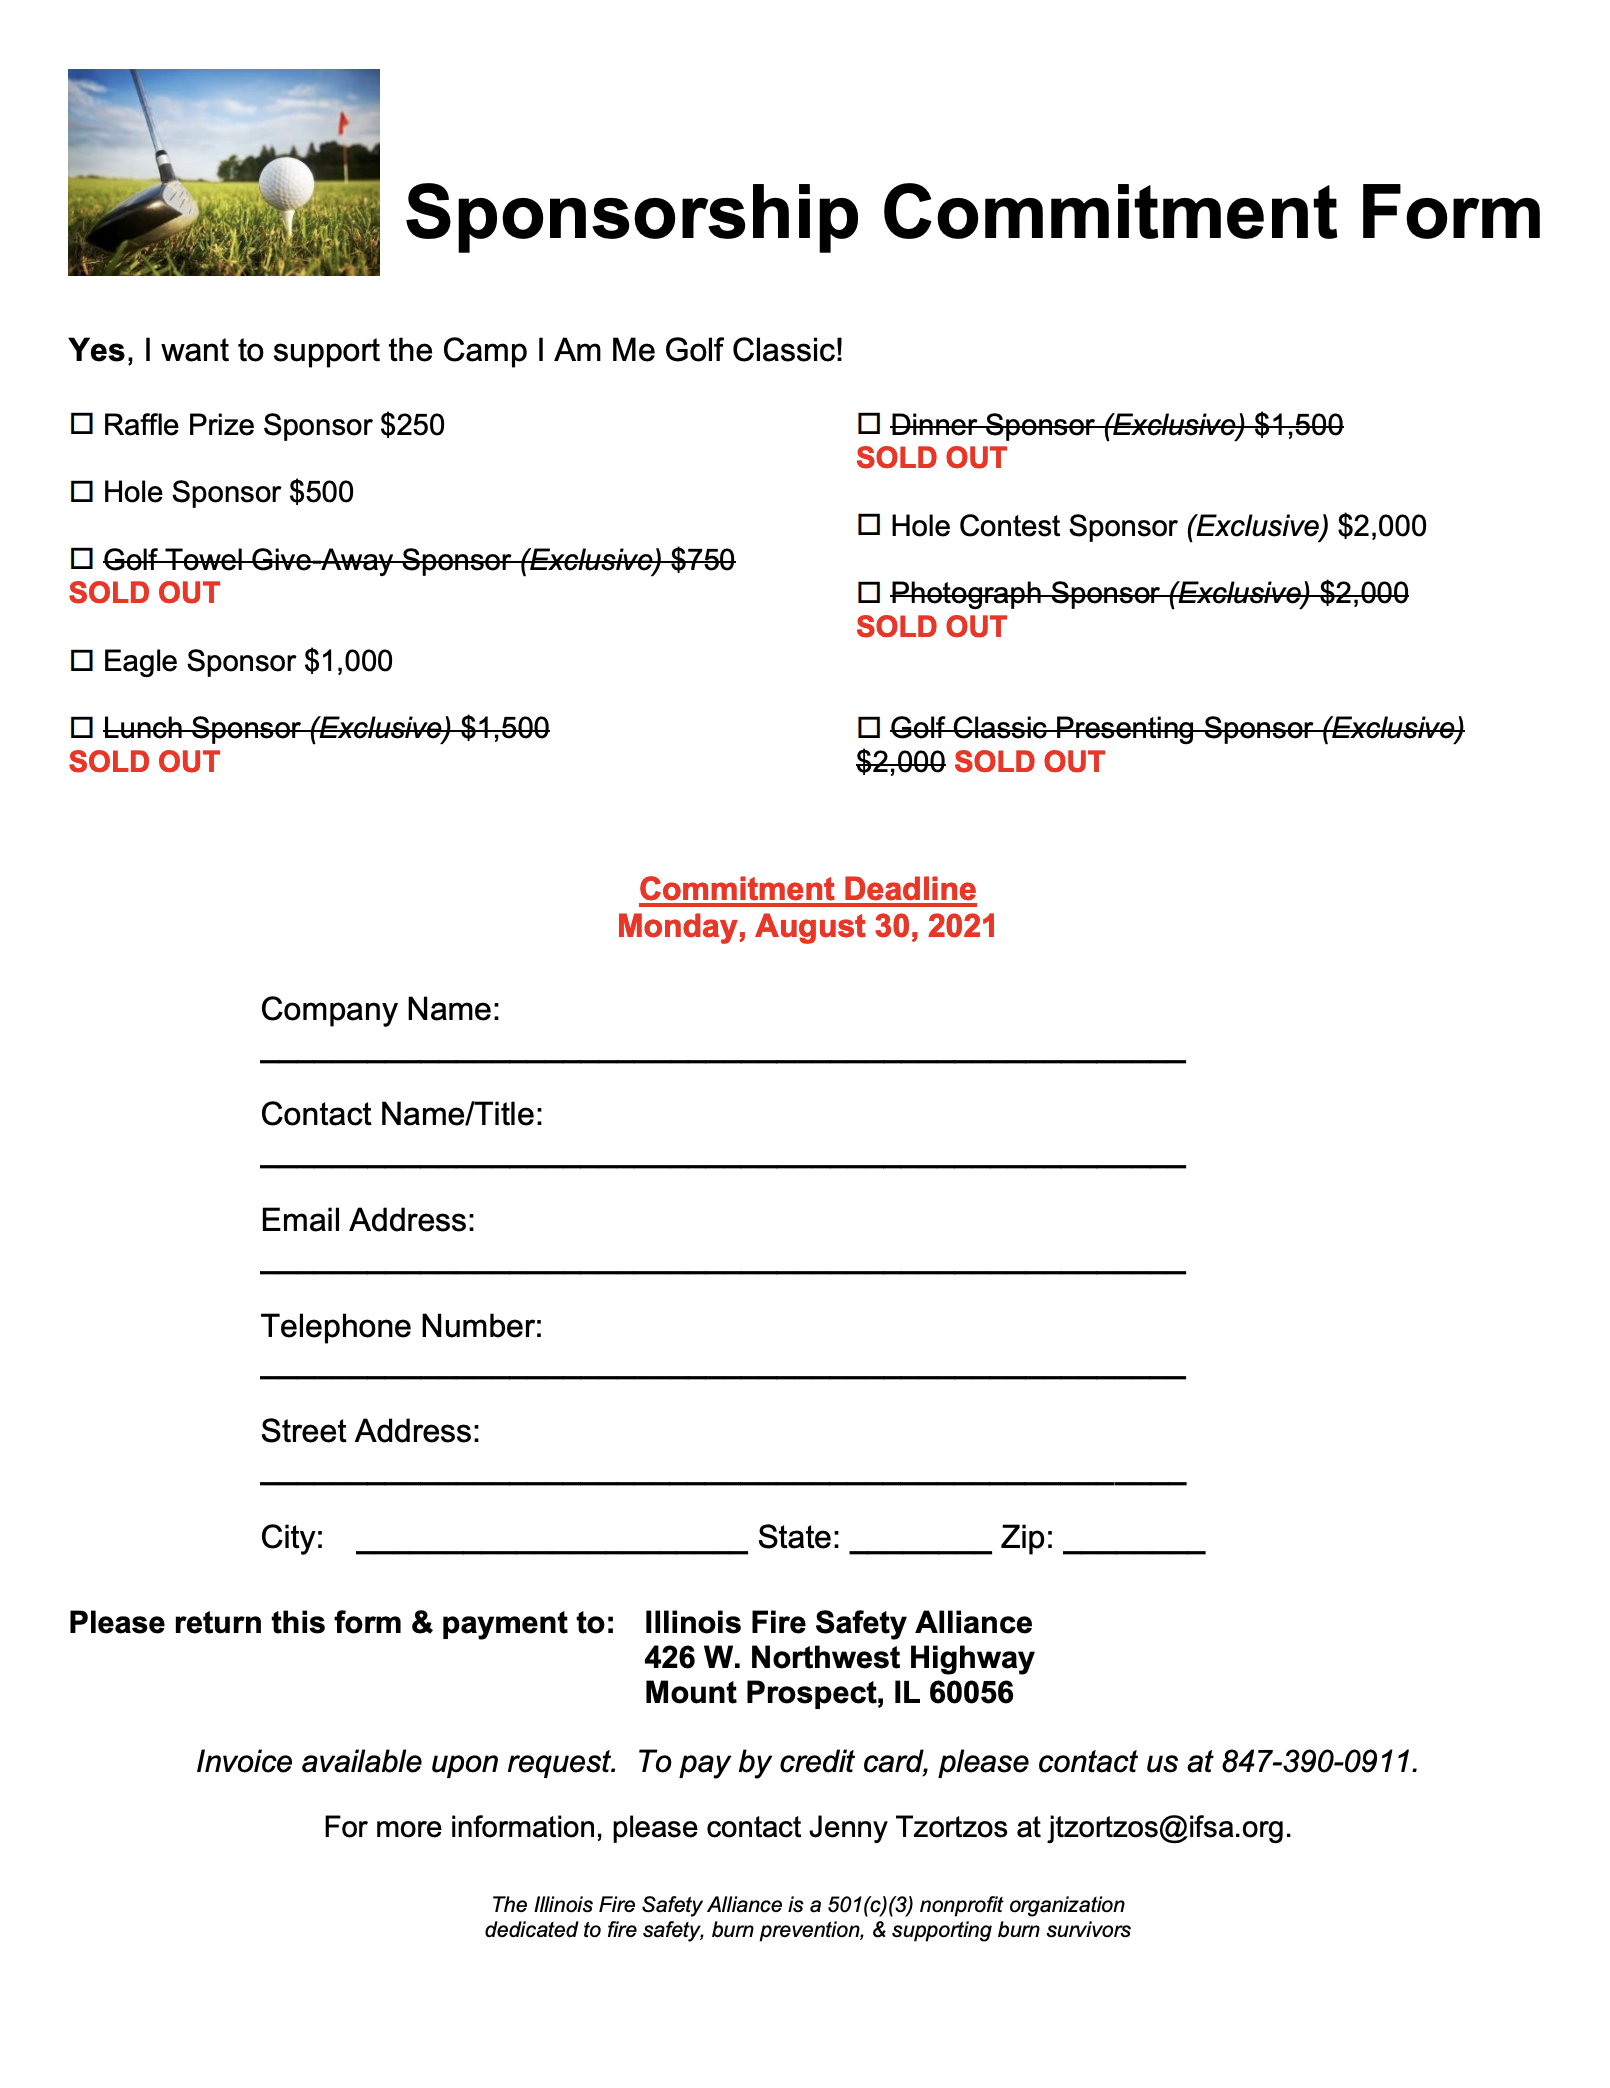 The Illinois Fire Safety Alliance (IFSA) will be hosting its FIRST EVER Golf Outing